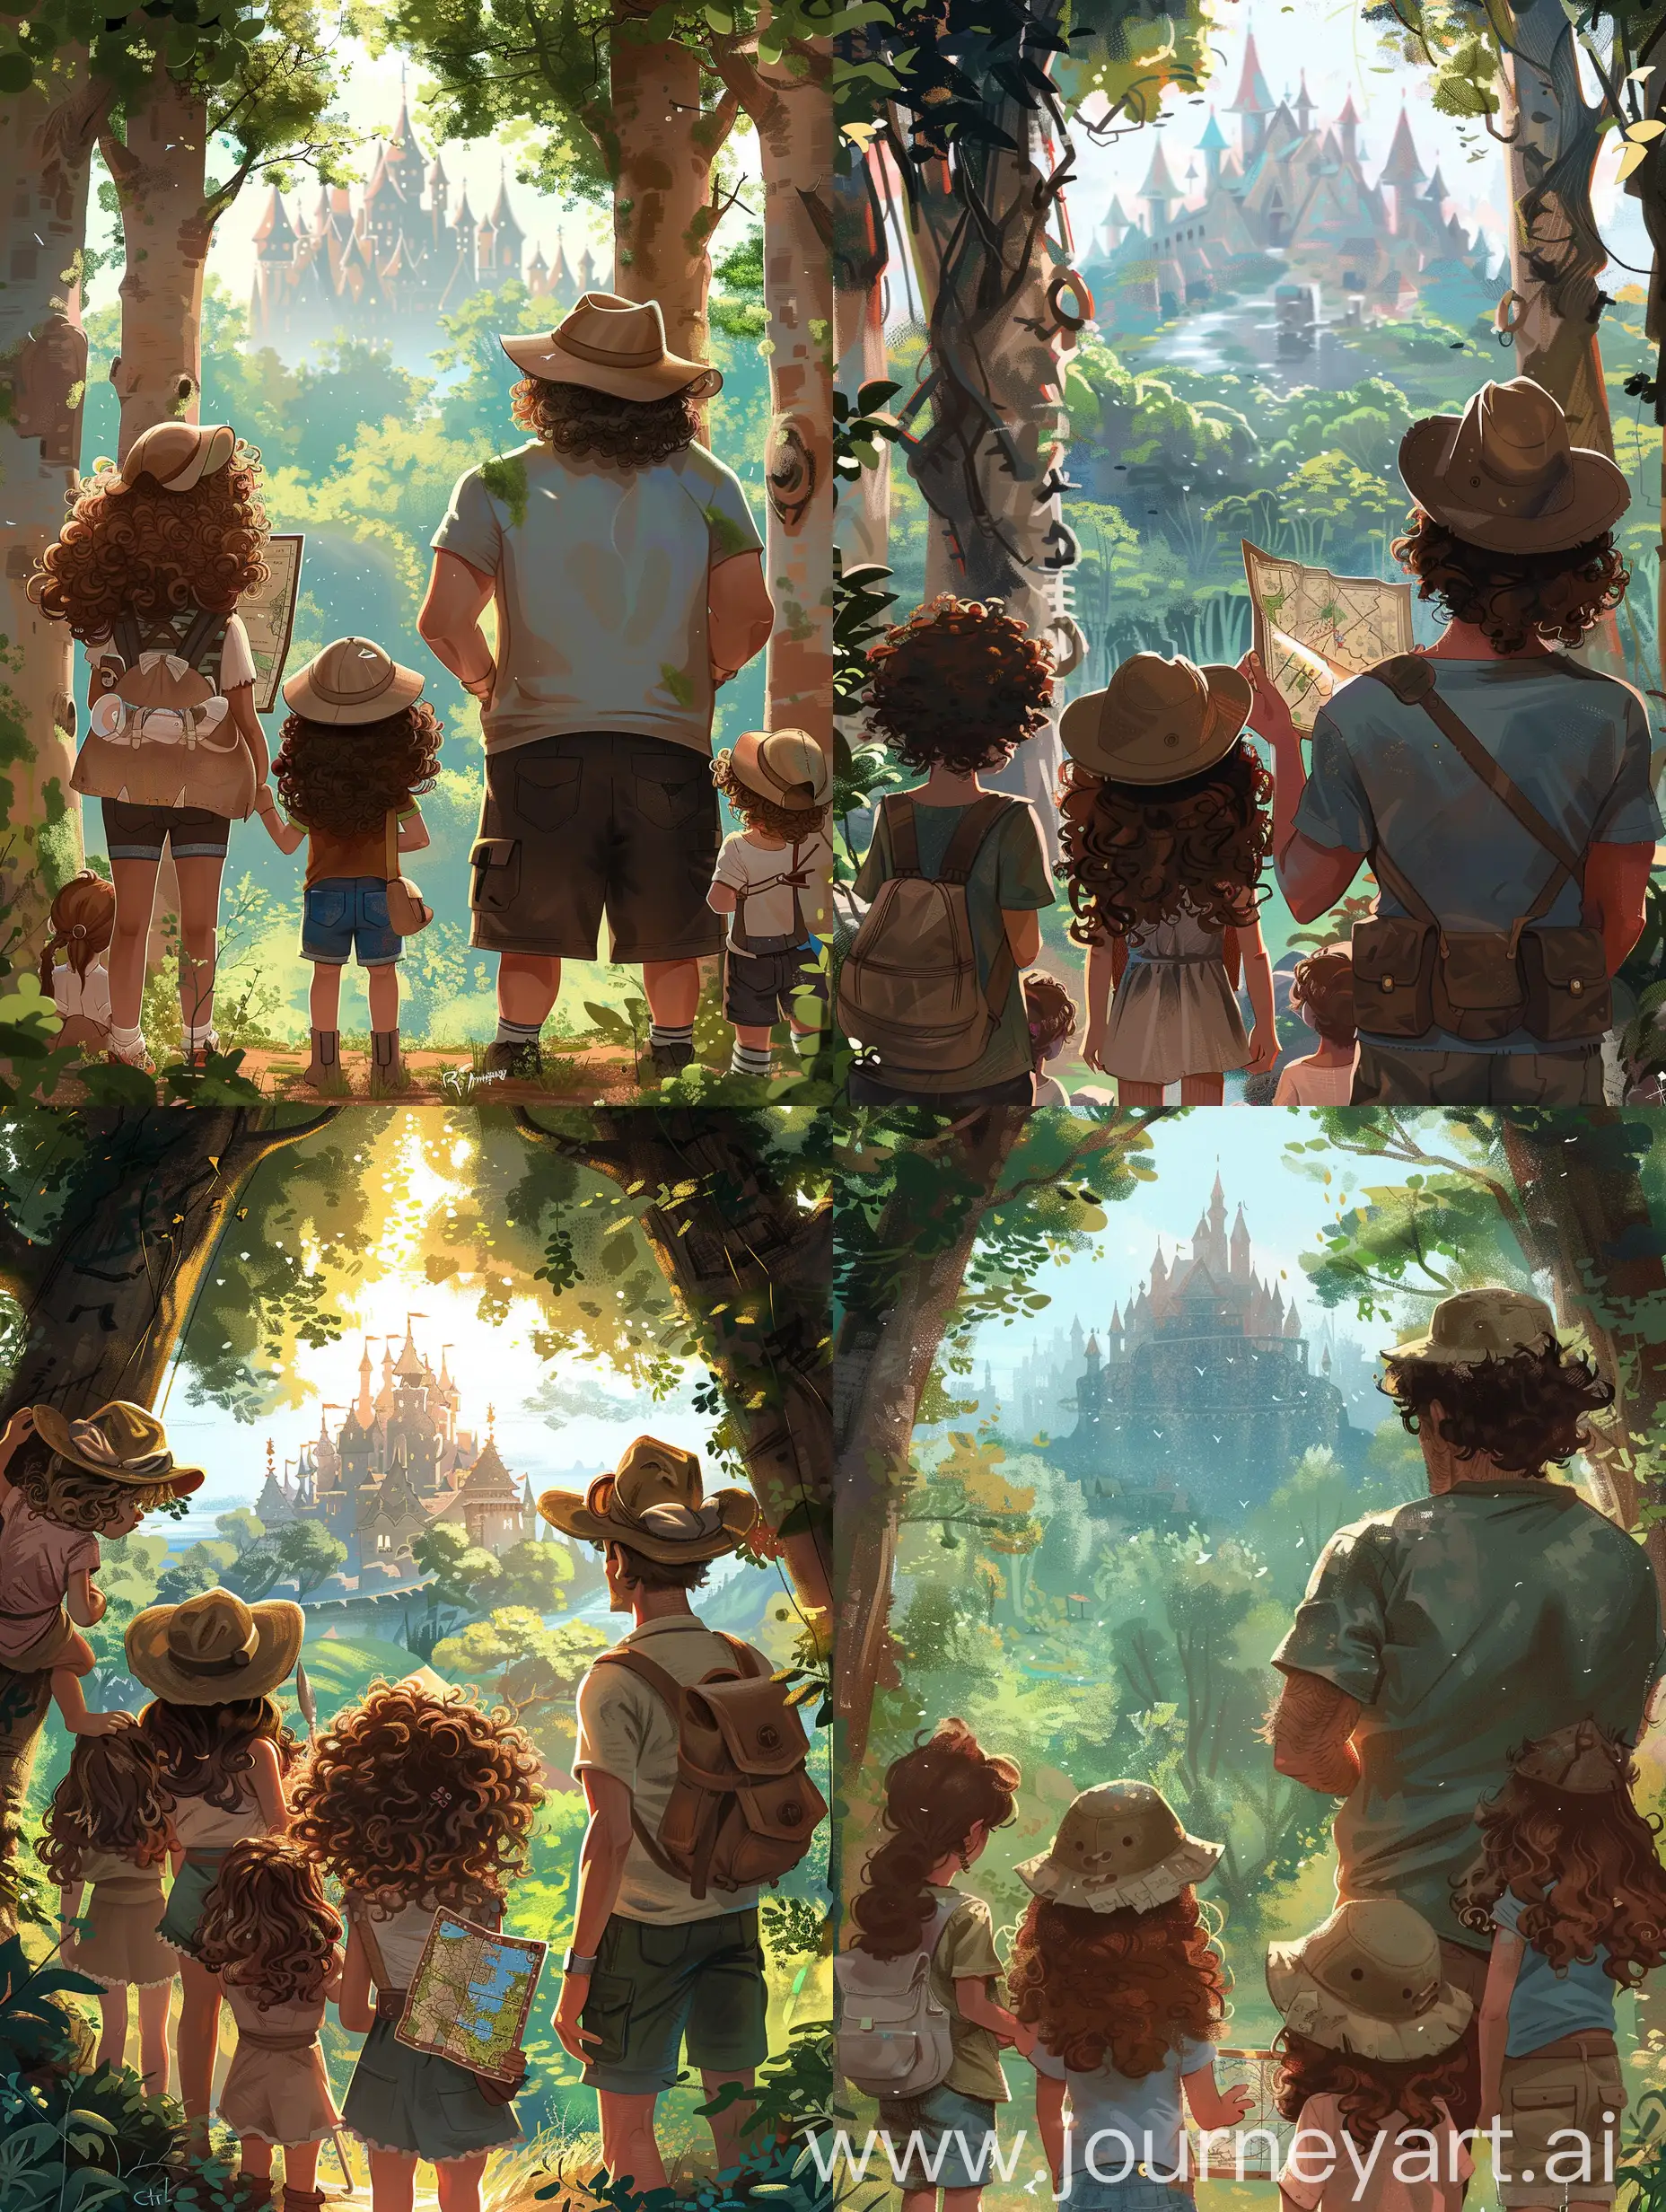 a little girl with brown curly hair, with a camping hat on her head and a map in her hand, standing next to her father who is wearing a camping hat on his head, with 2 little girls and 1 little boy who also are wearing a camping hat on their heads, looking through the trees to a big kingdom far away, only their backs are shown and all of them are next to each other, amazing digital illustration 